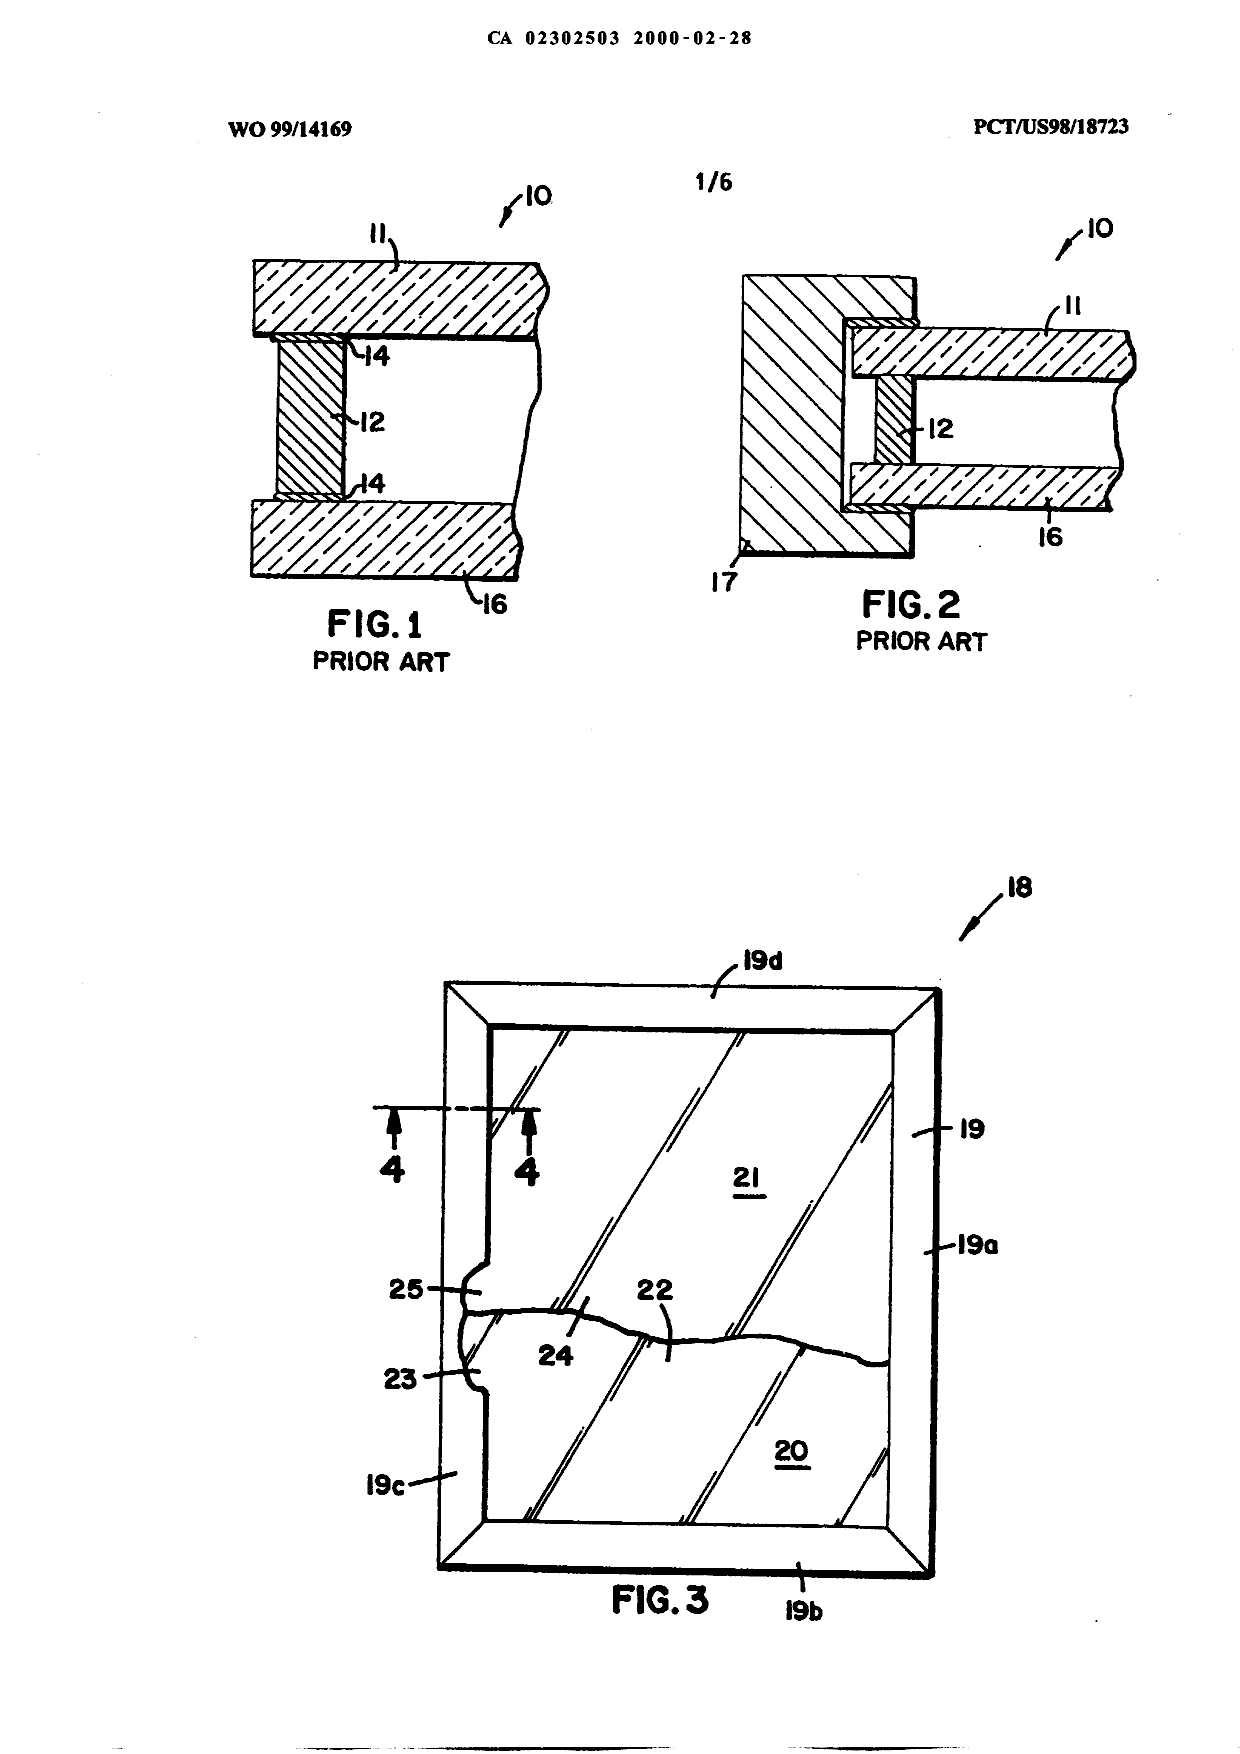 Canadian Patent Document 2302503. Drawings 20000228. Image 1 of 6